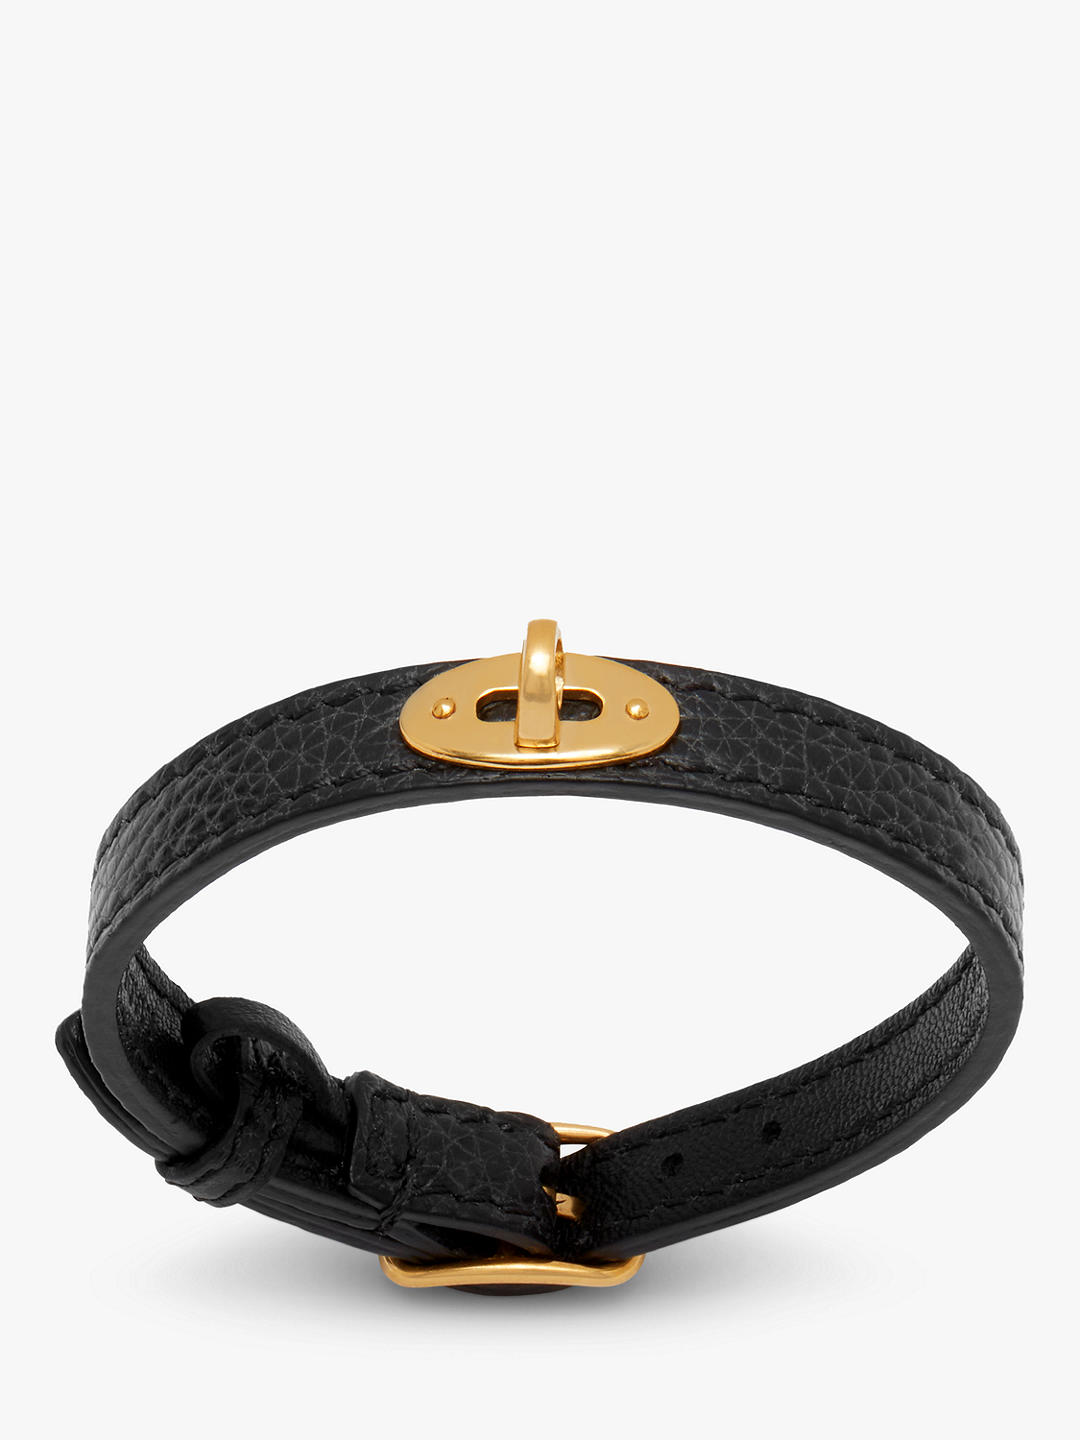 Mulberry Bayswater Small Classic Grain Leather Thin Bracelet, Black